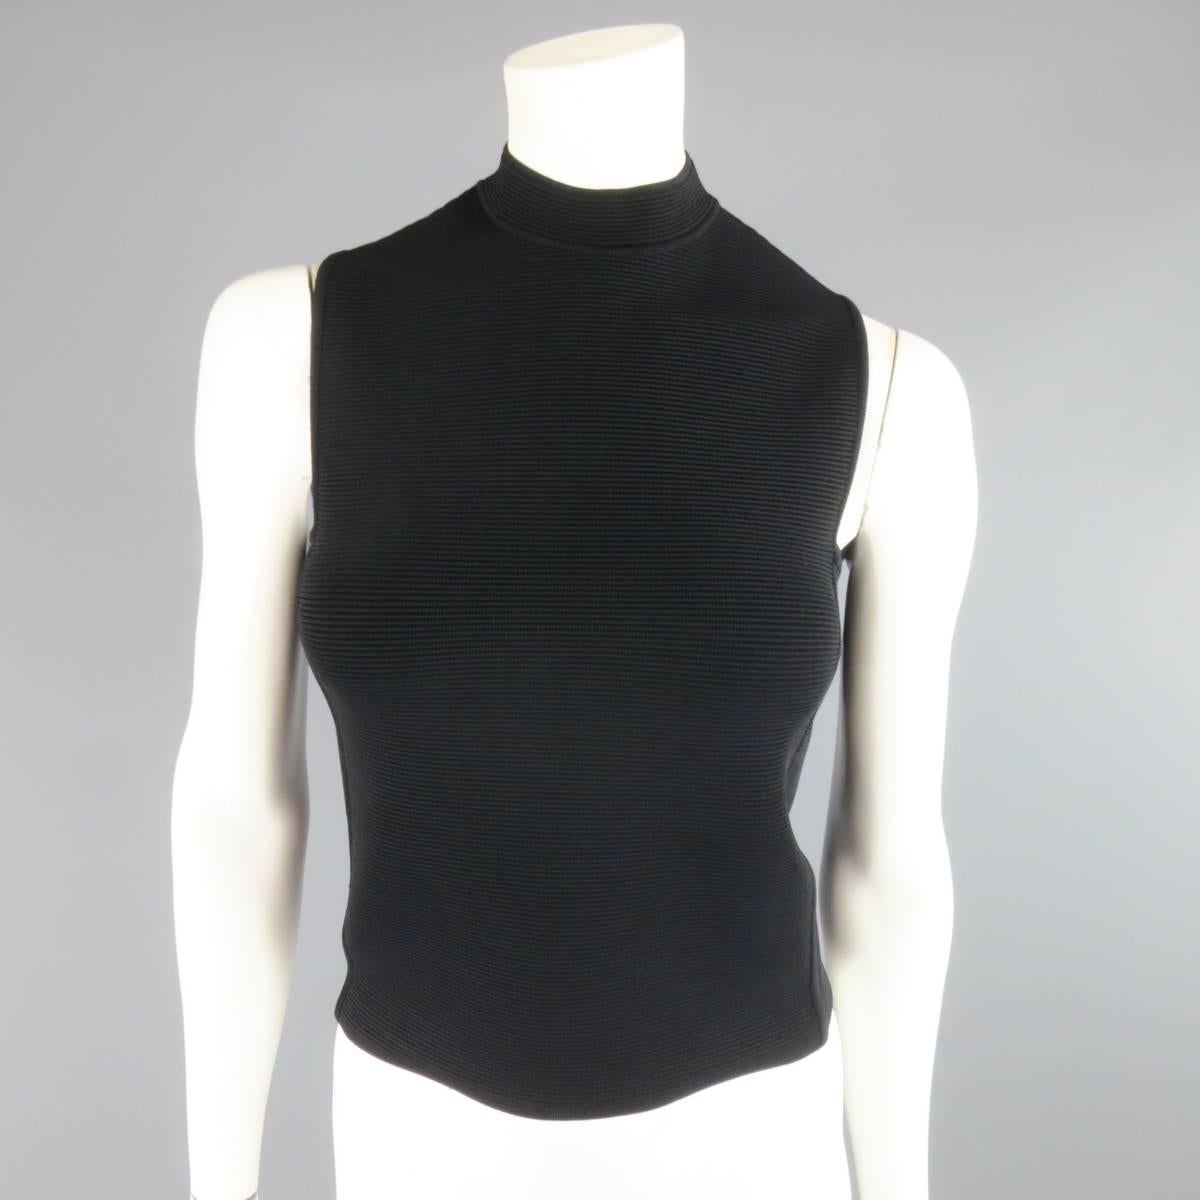 RALPH LAUREN Collection top comes in a ribbed stretch bandage fabric with a boxy cut and mock neck. Made in Italy.
 
Excellent Pre-Owned Condition.
Marked: S
 
Measurements:
 
Shoulders: 12 In.
Bust: 34 In.
Length: 19 In.